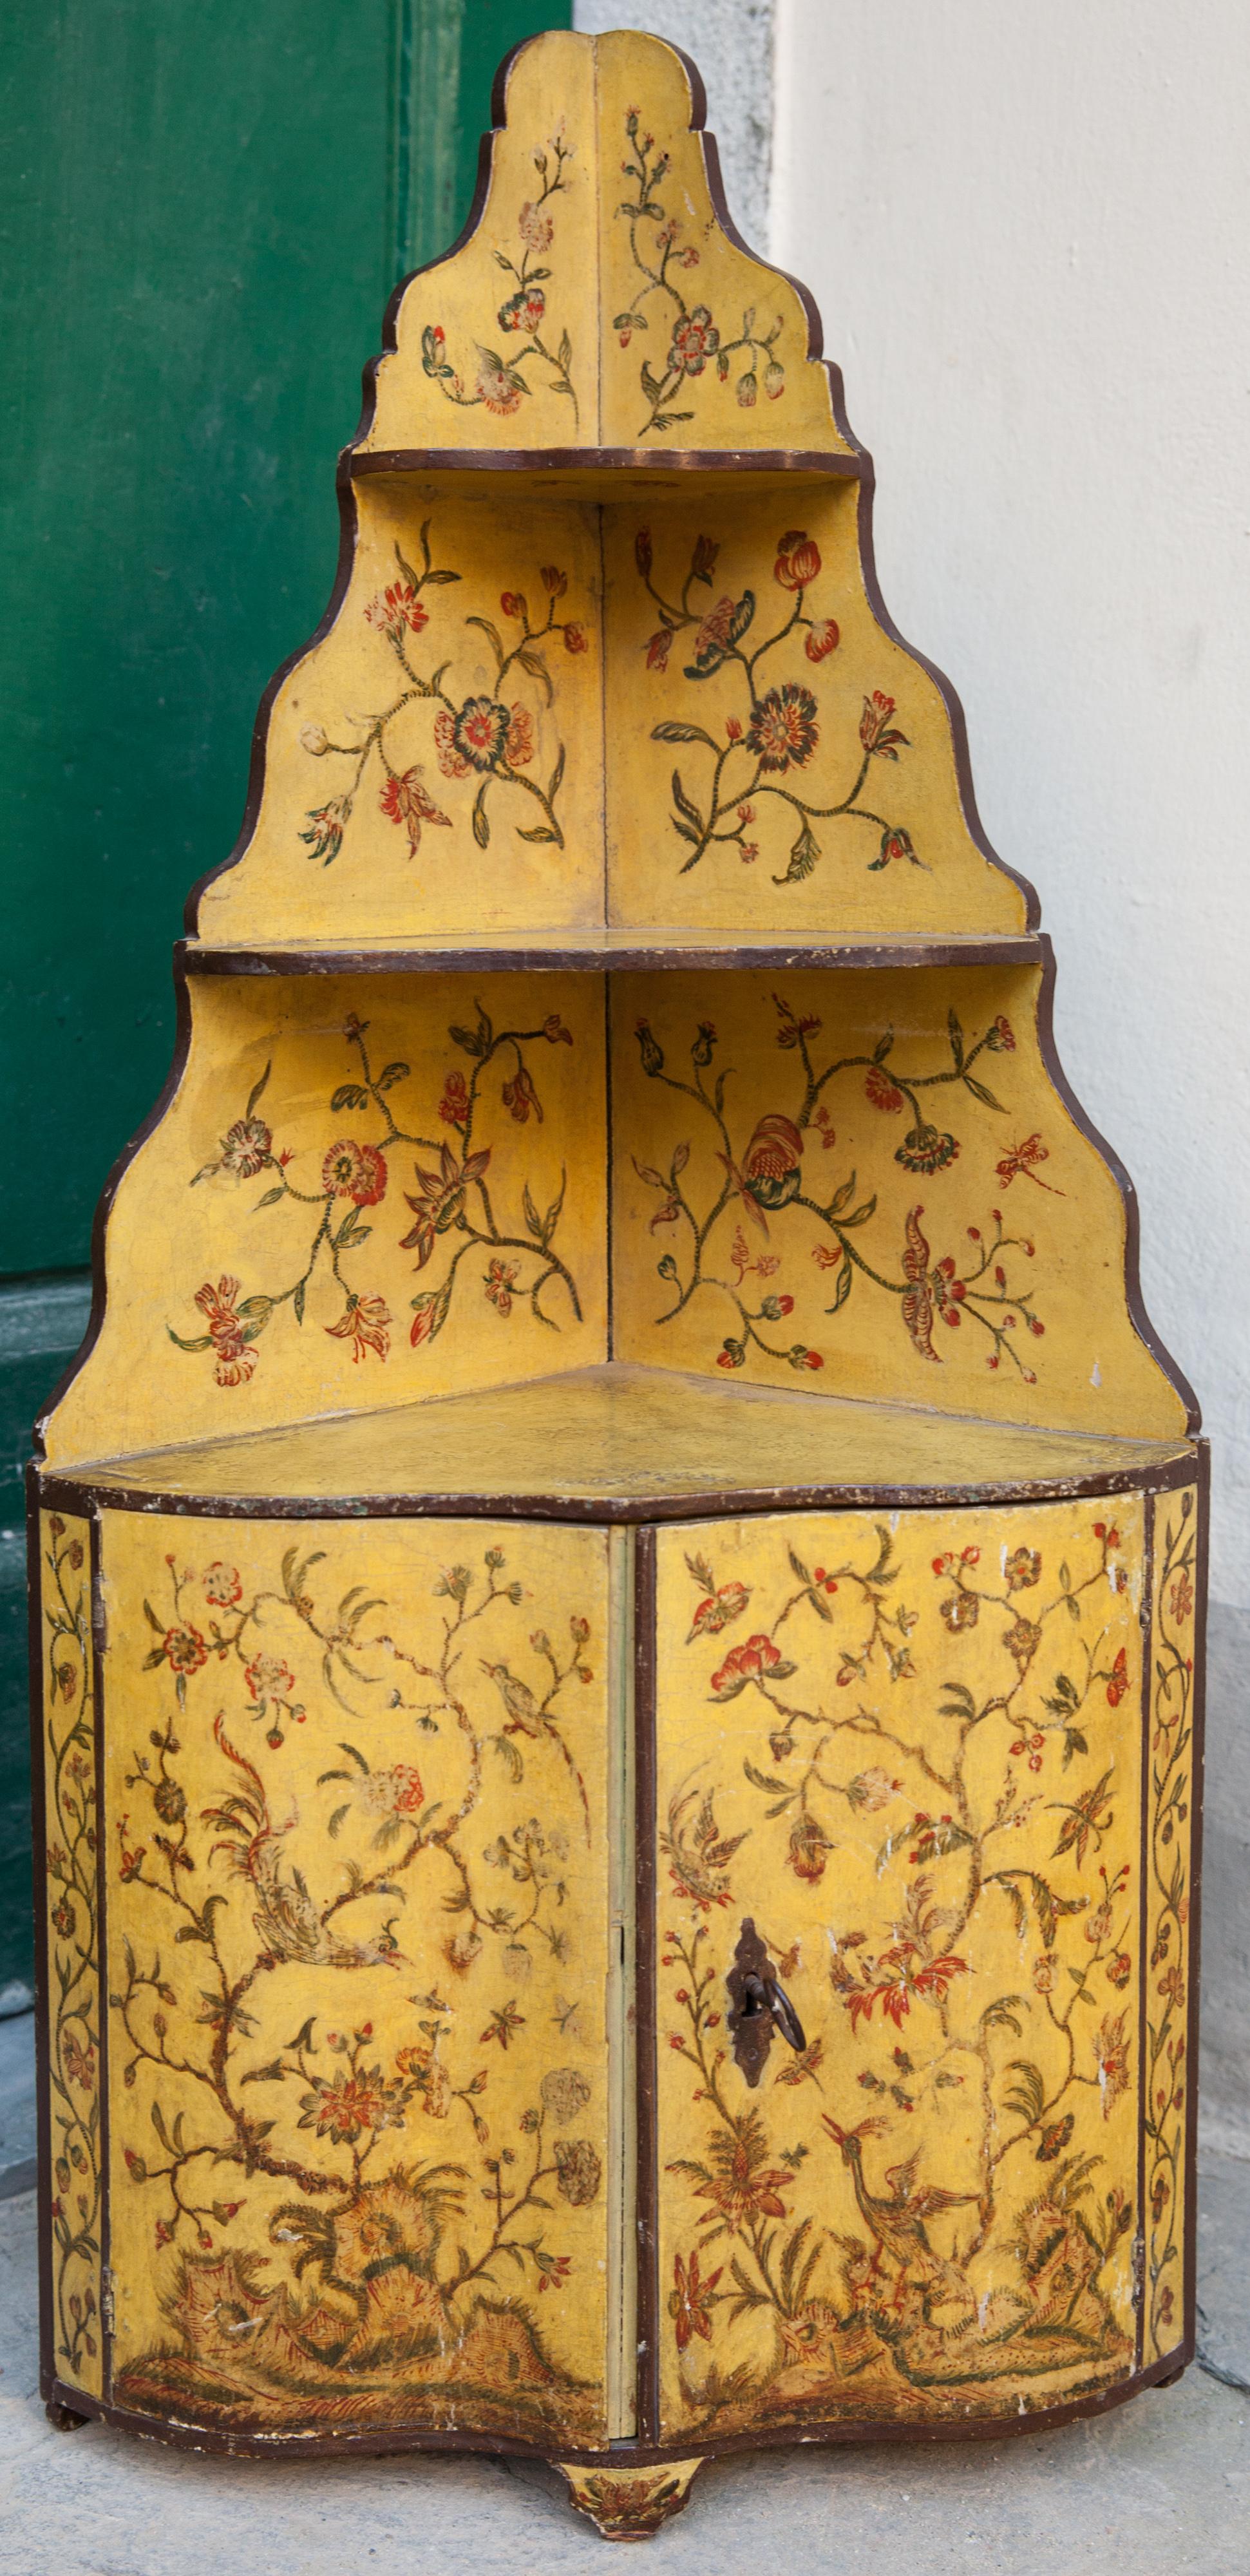 Mid 18th century Rococo Chinoiserie Corner capboard with Exotic Flowers and bir - Art by Unknown